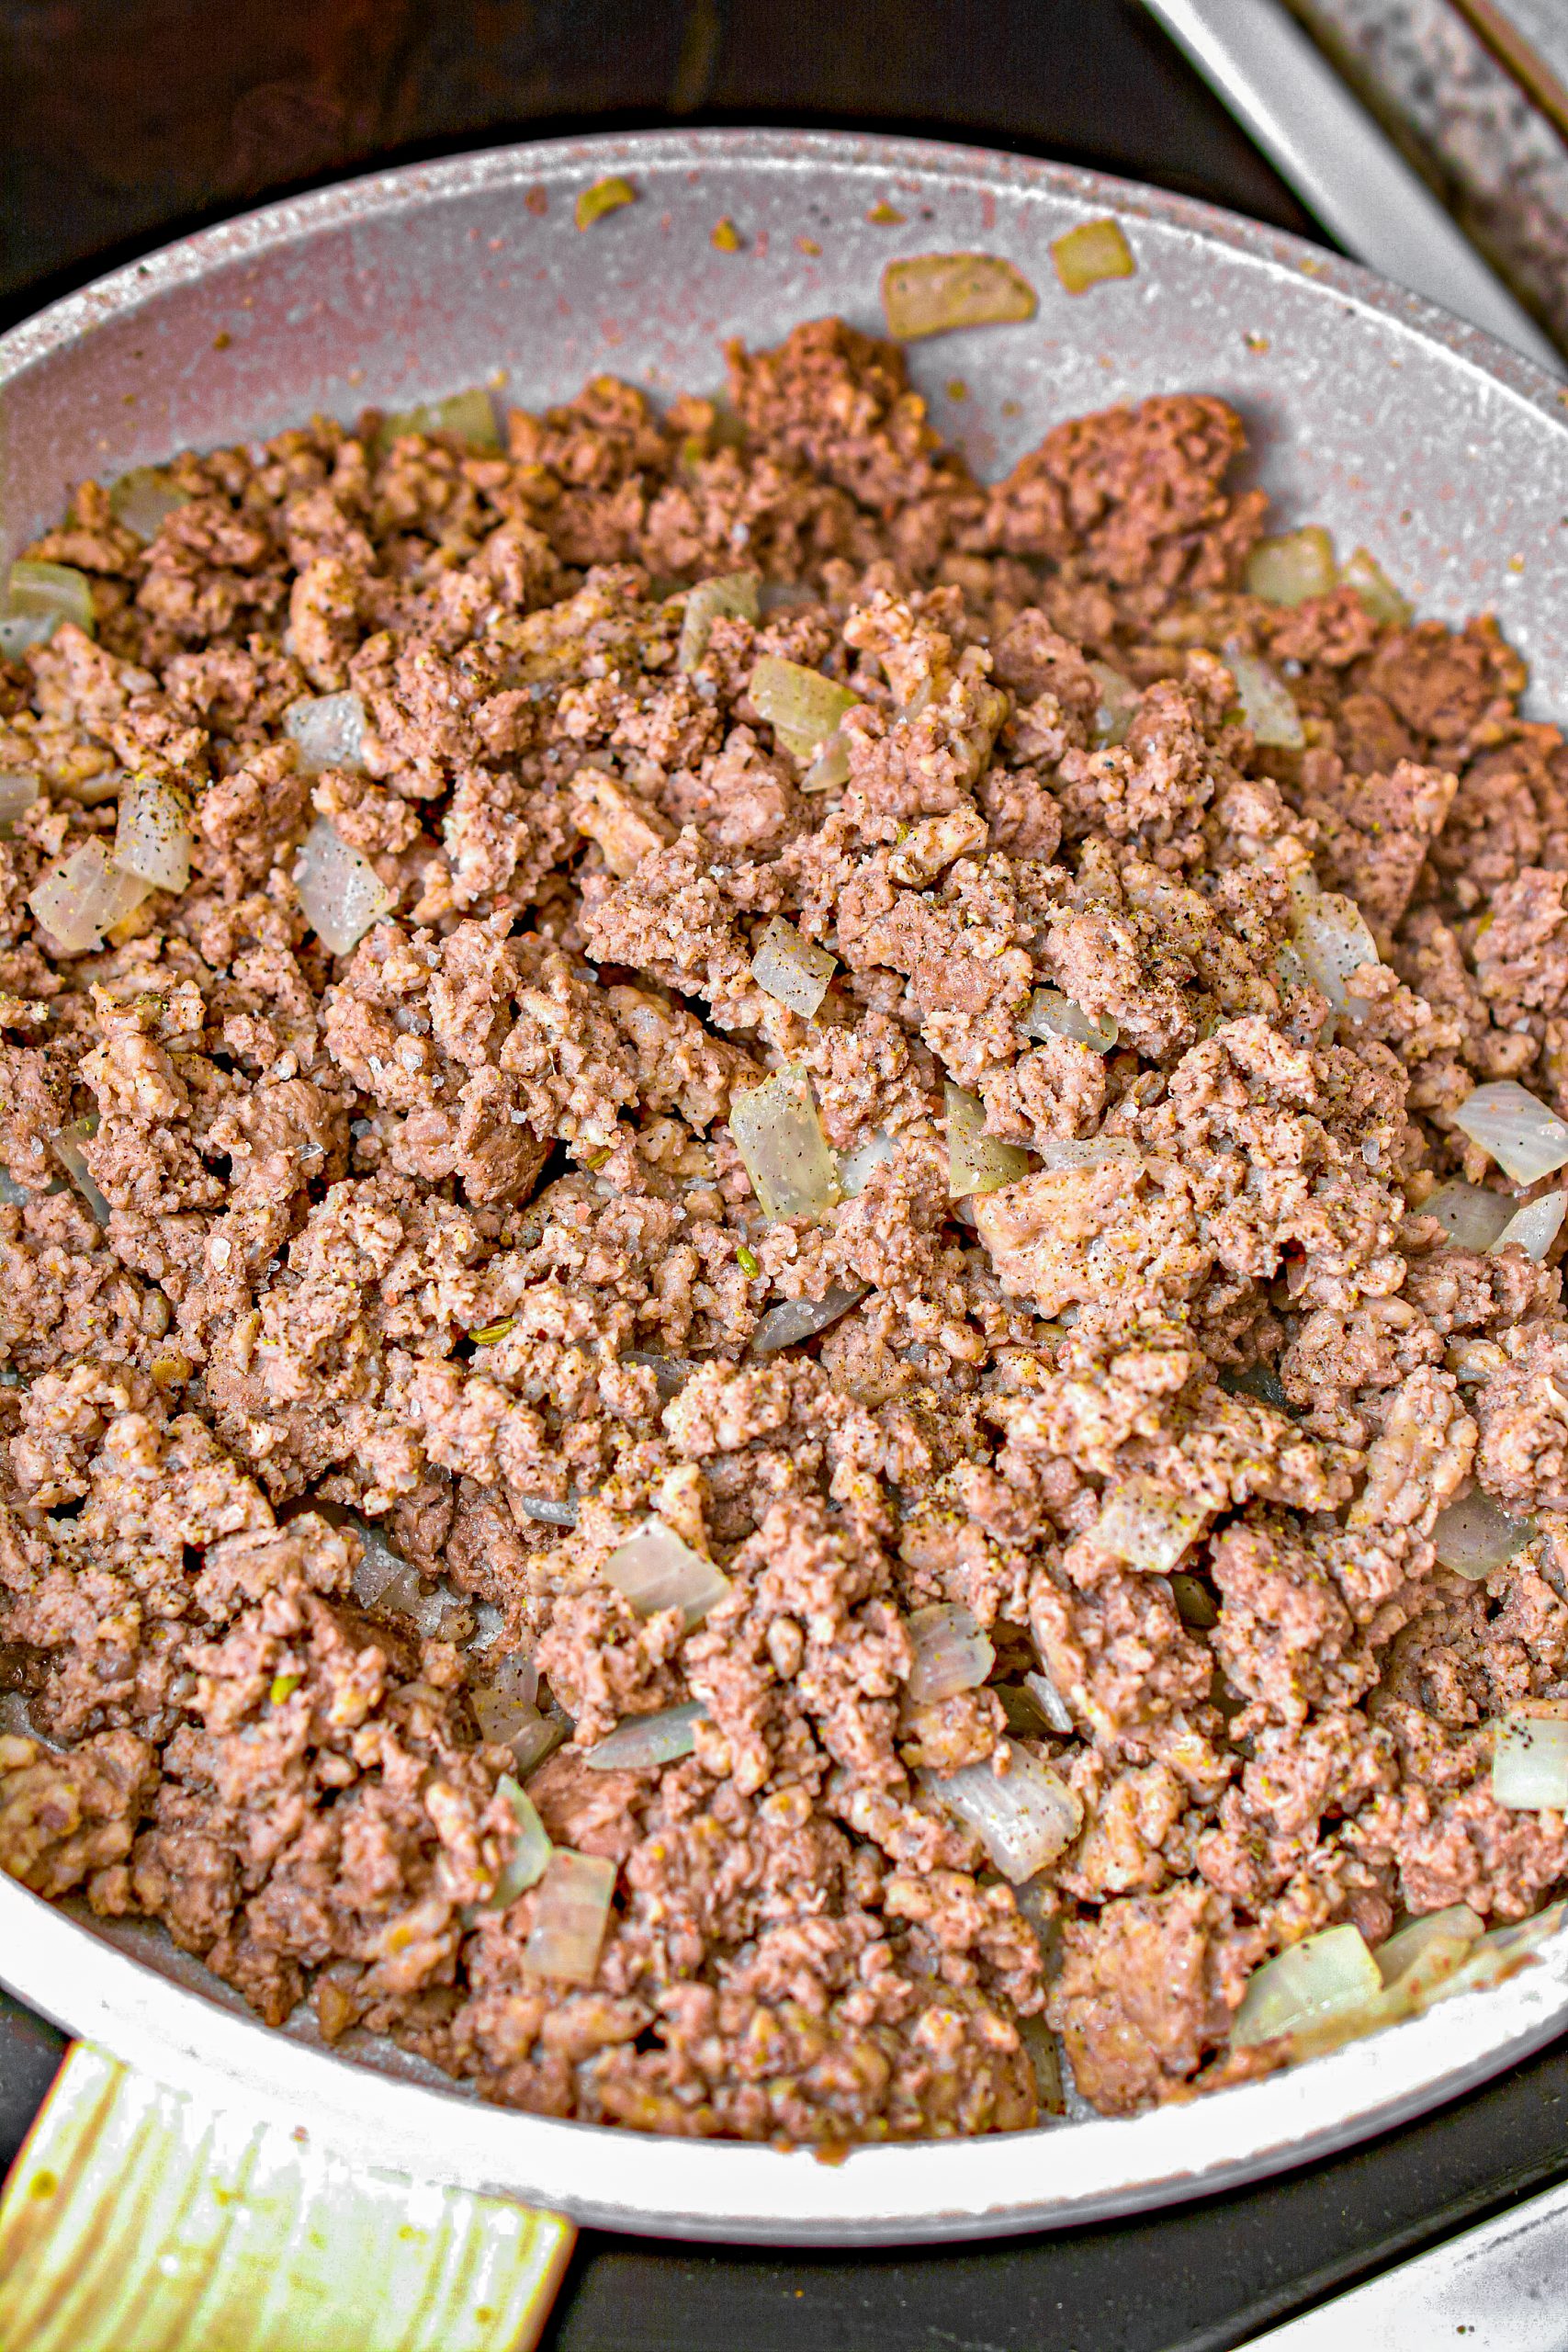 Cook the ground beef, onions and ground sausage in a large skillet over medium high heat until the meat is browned completely, and the onions have softened.